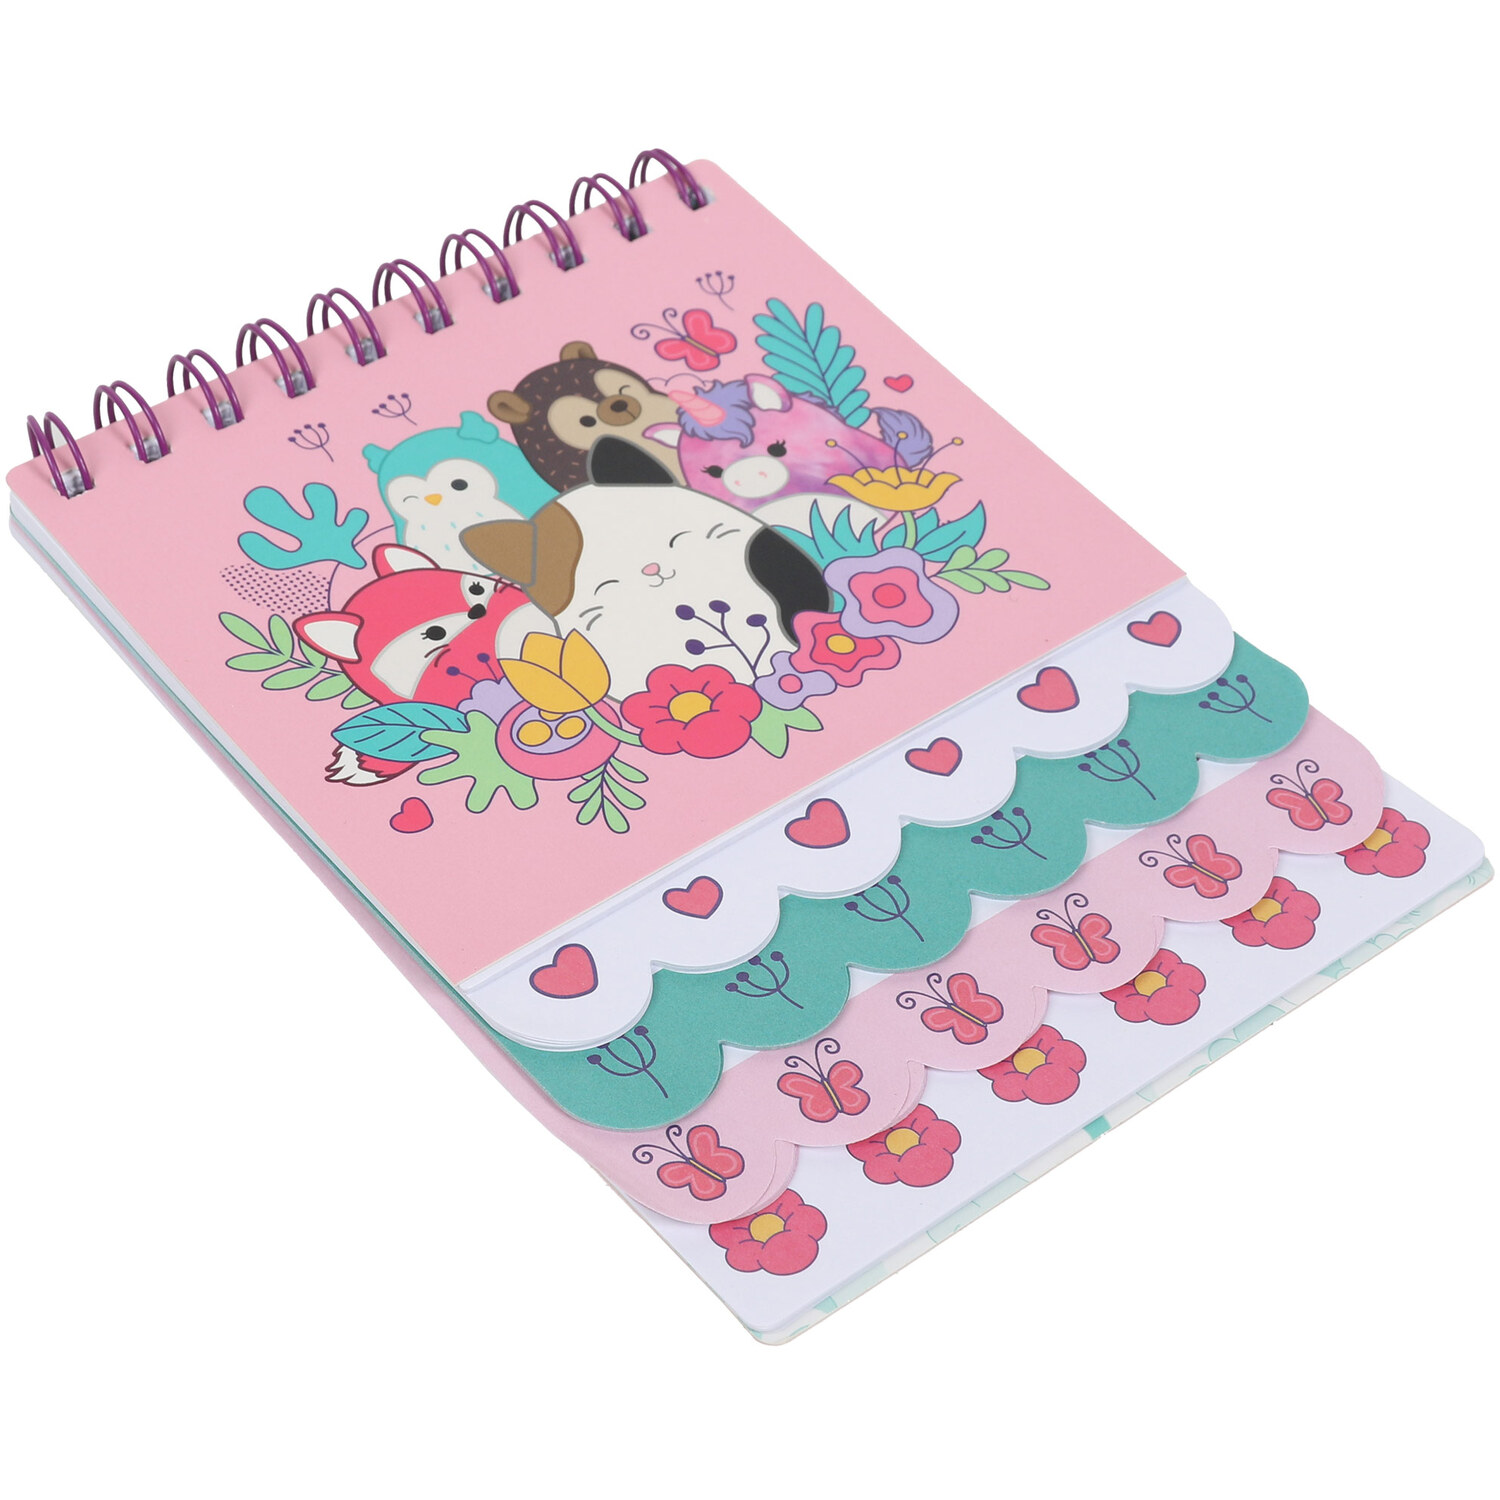 Squishmallows Pink Layered Notebook Image 2